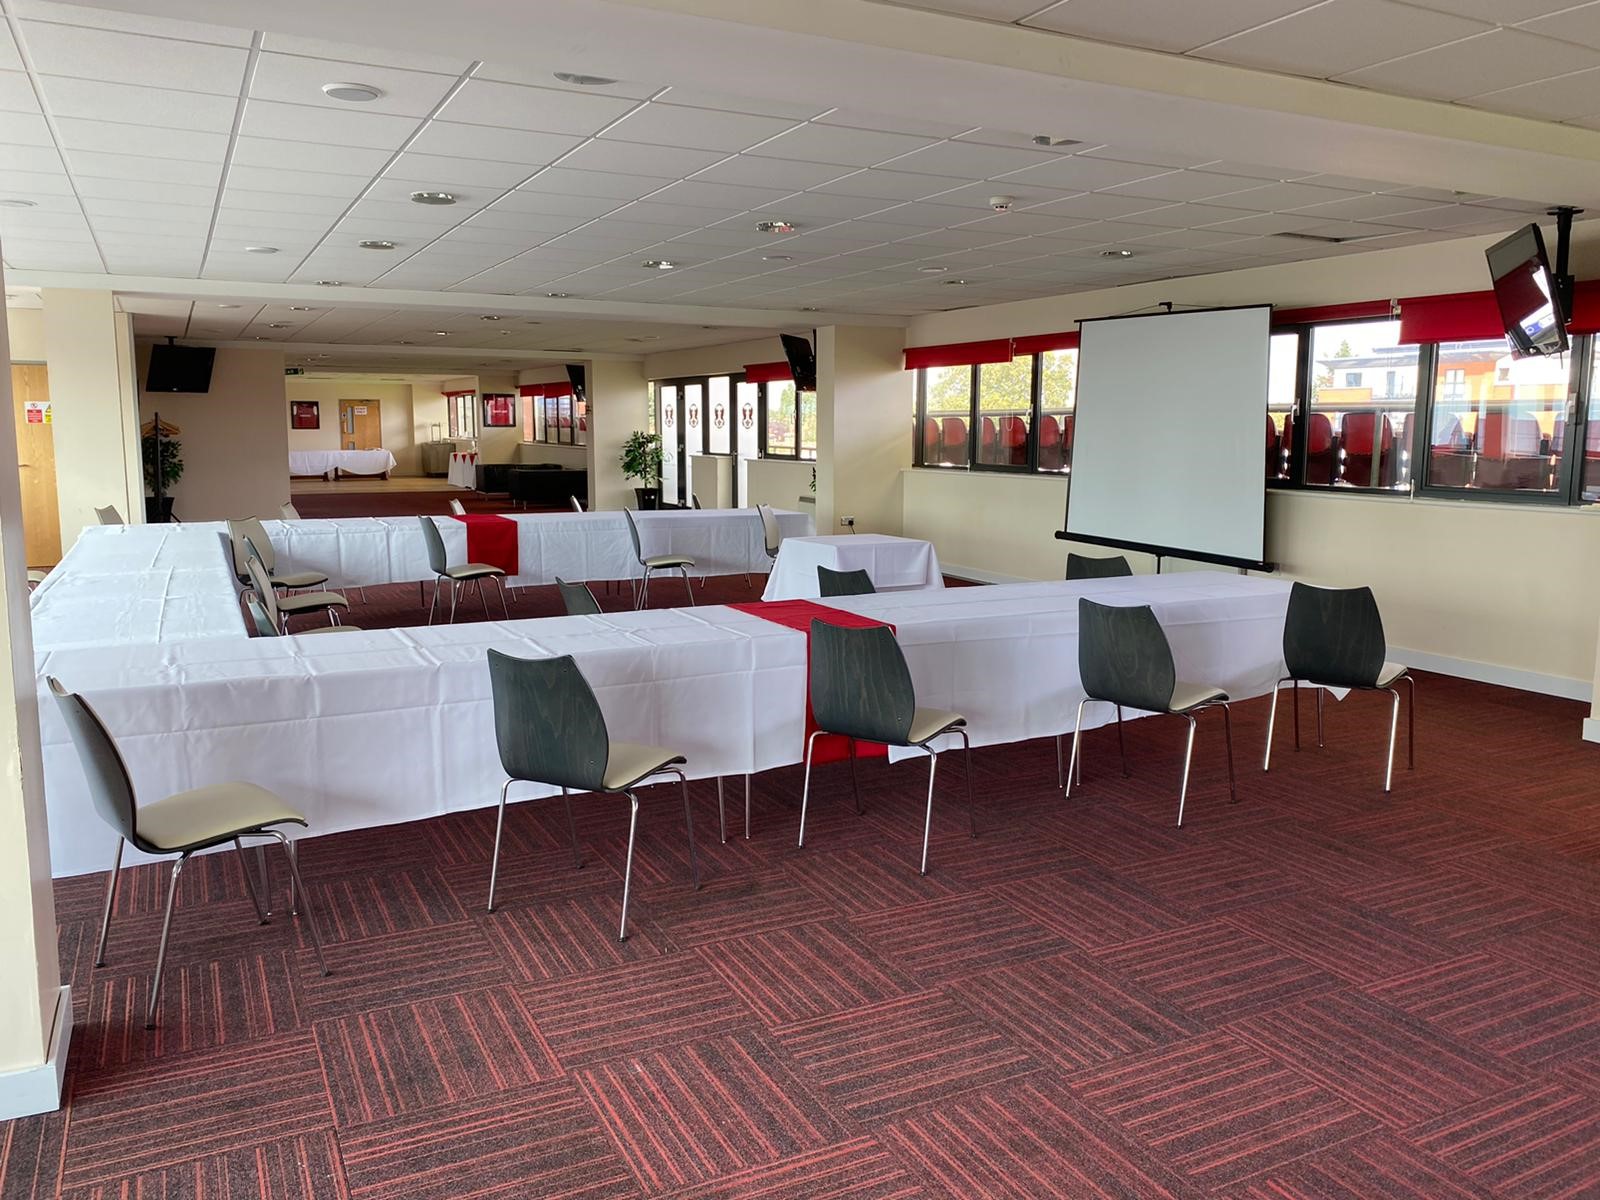 Meeting room for presentation